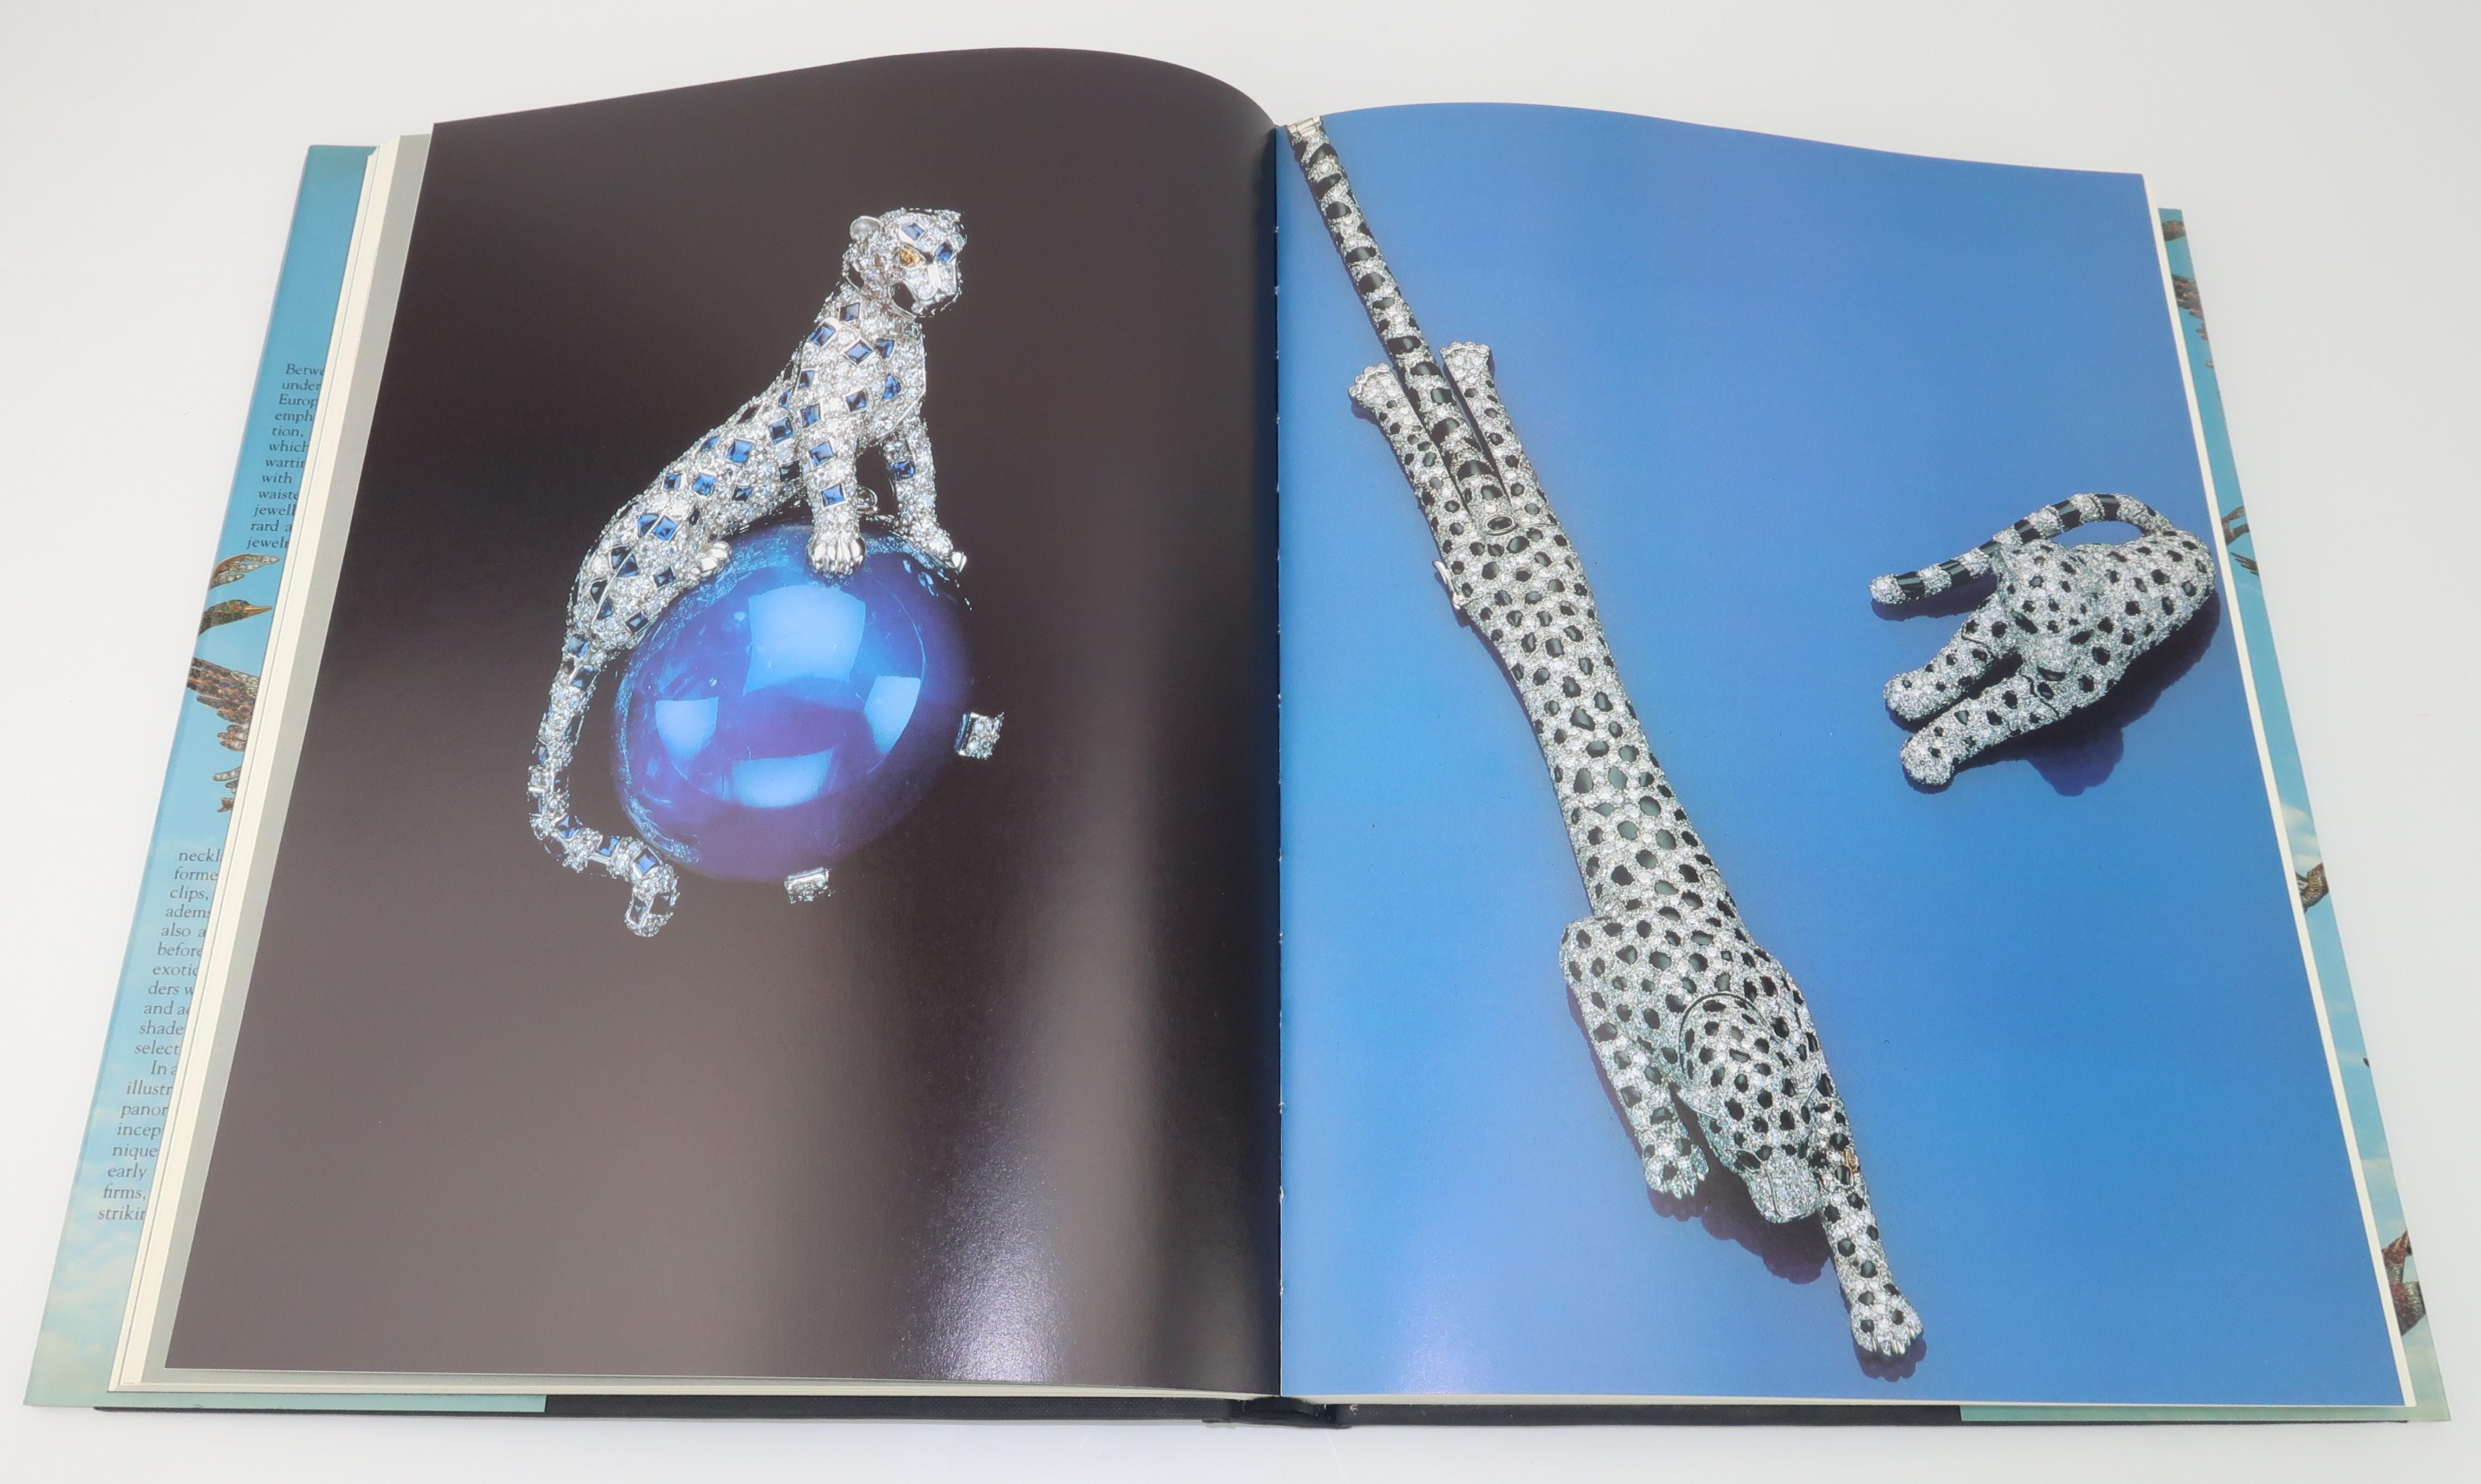 Women's or Men's 'Jewelry of the 1940s and 1950s' by Sylvie Raulet Collector's Coffee Table Book